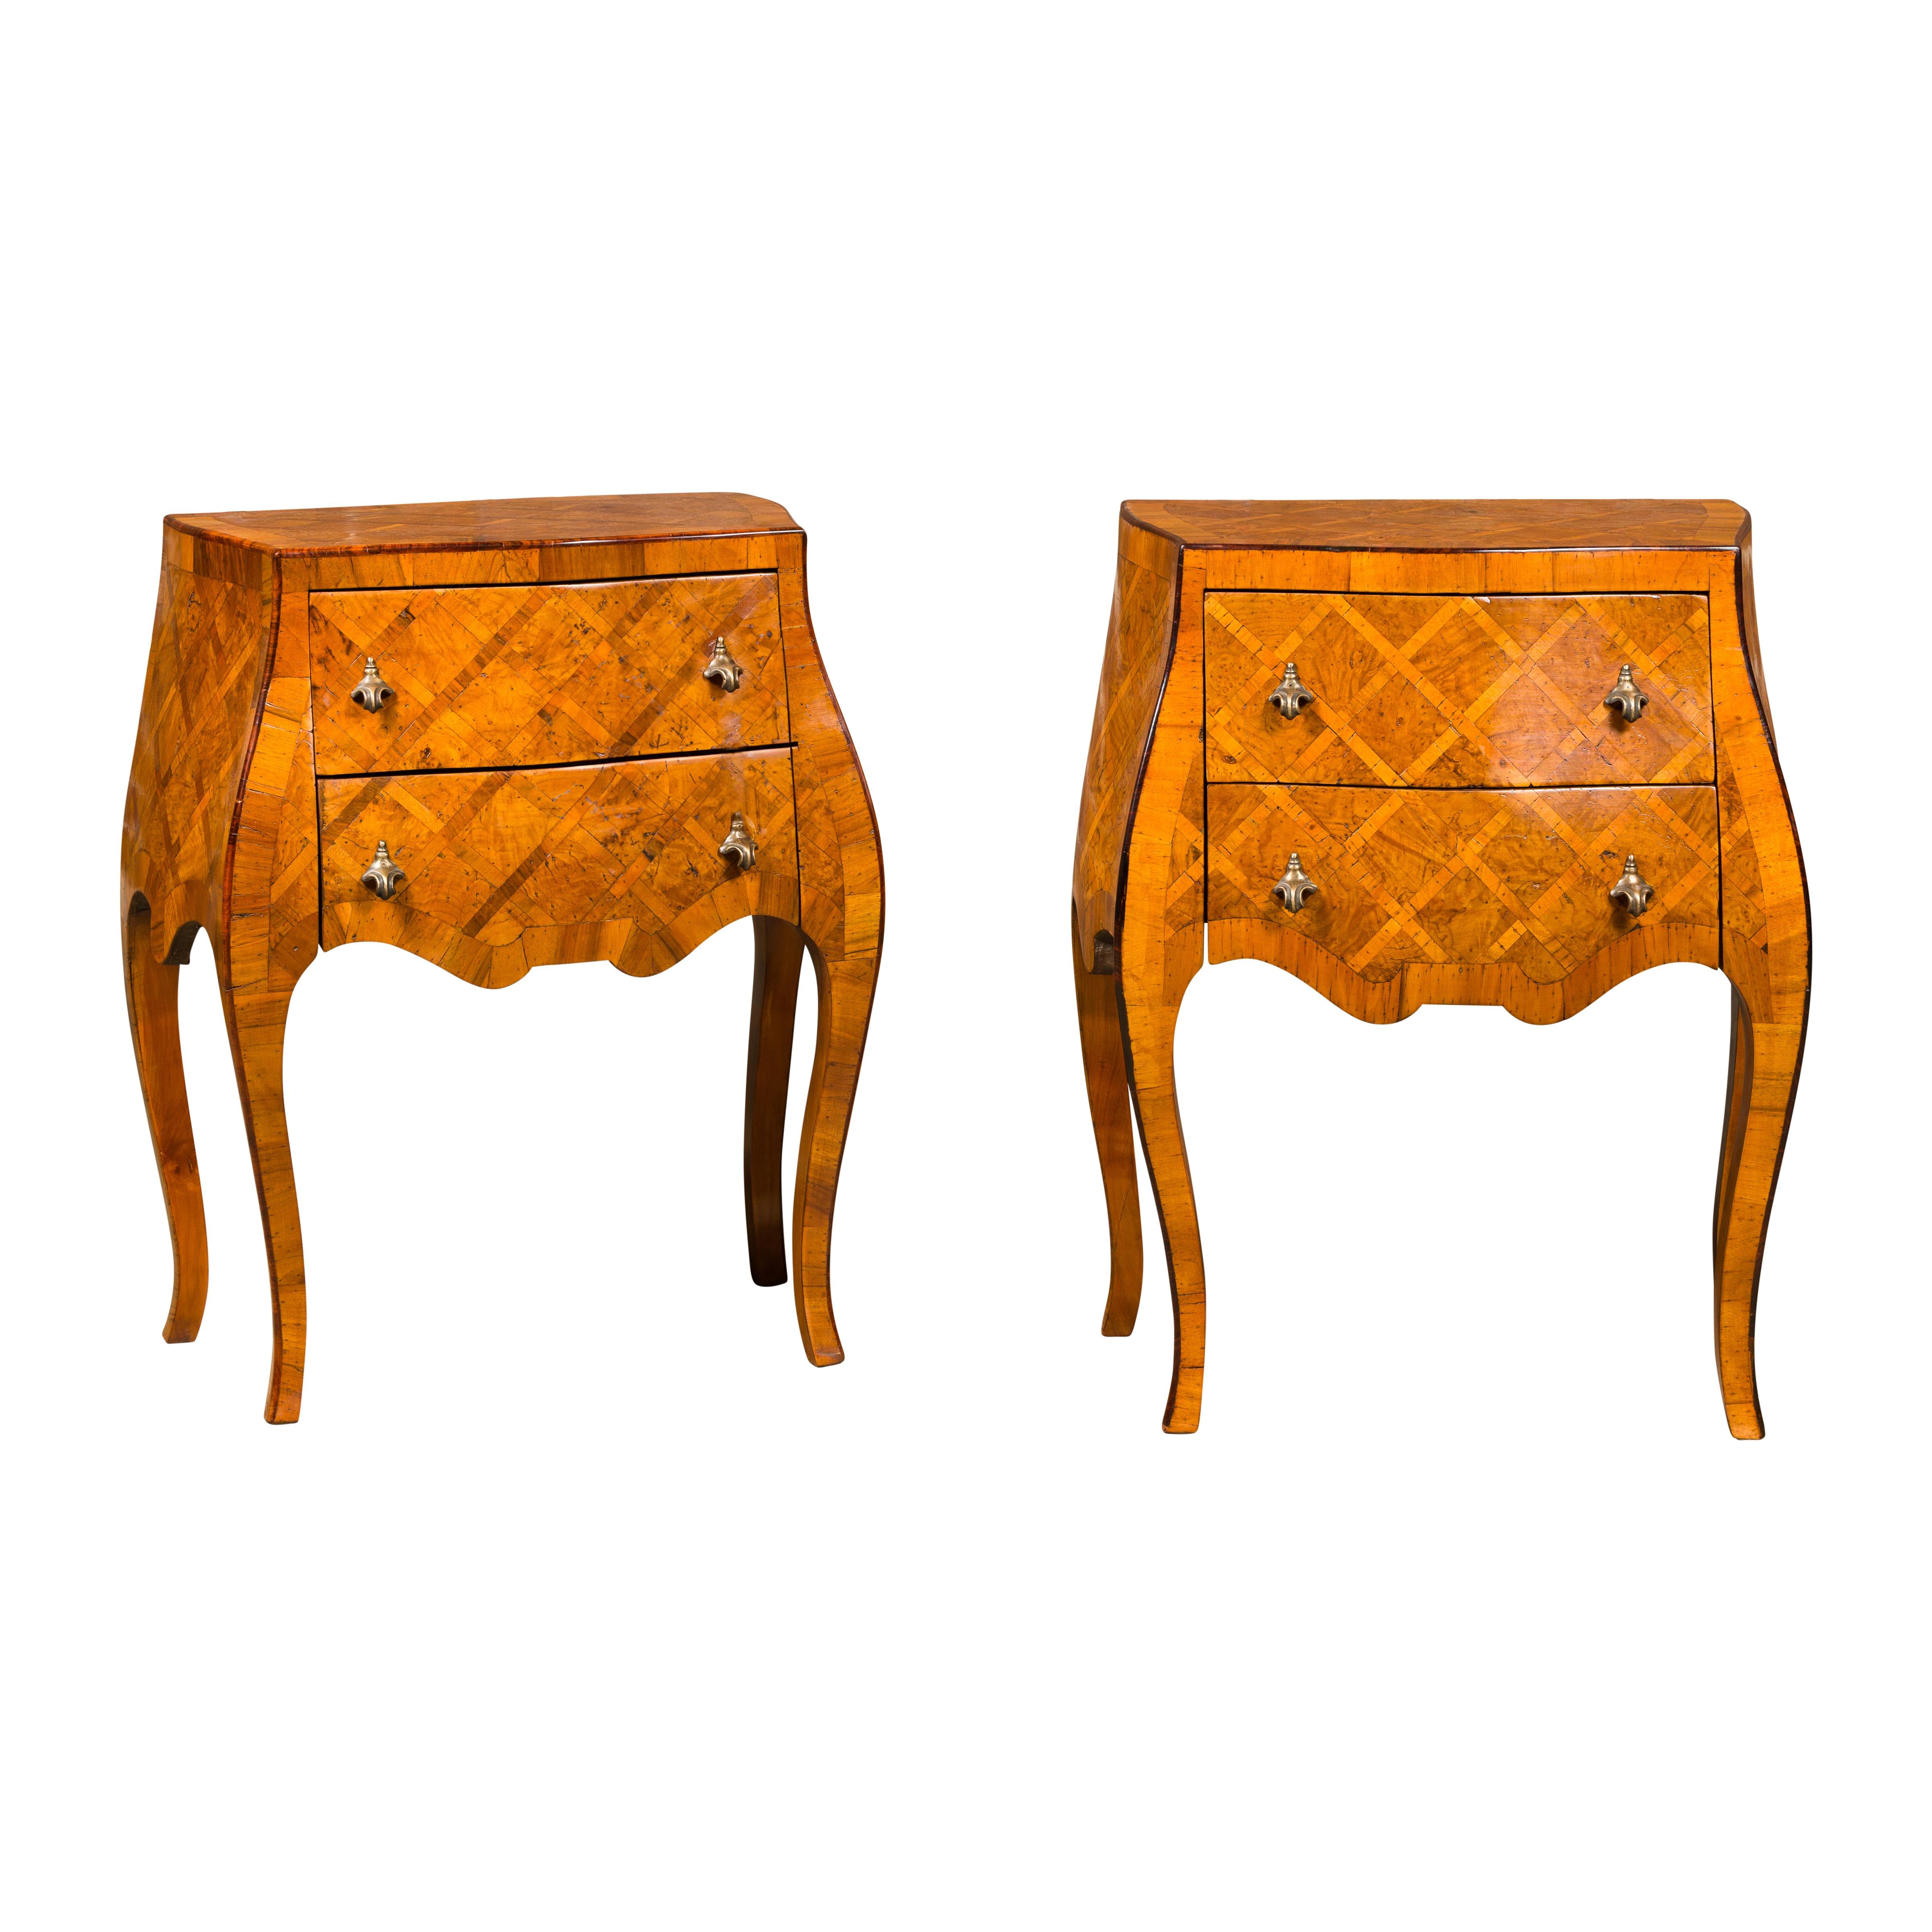 Italian Rococo Style Burl Wood Marquetry Bedside Chests with Cabriole Legs For Sale 11